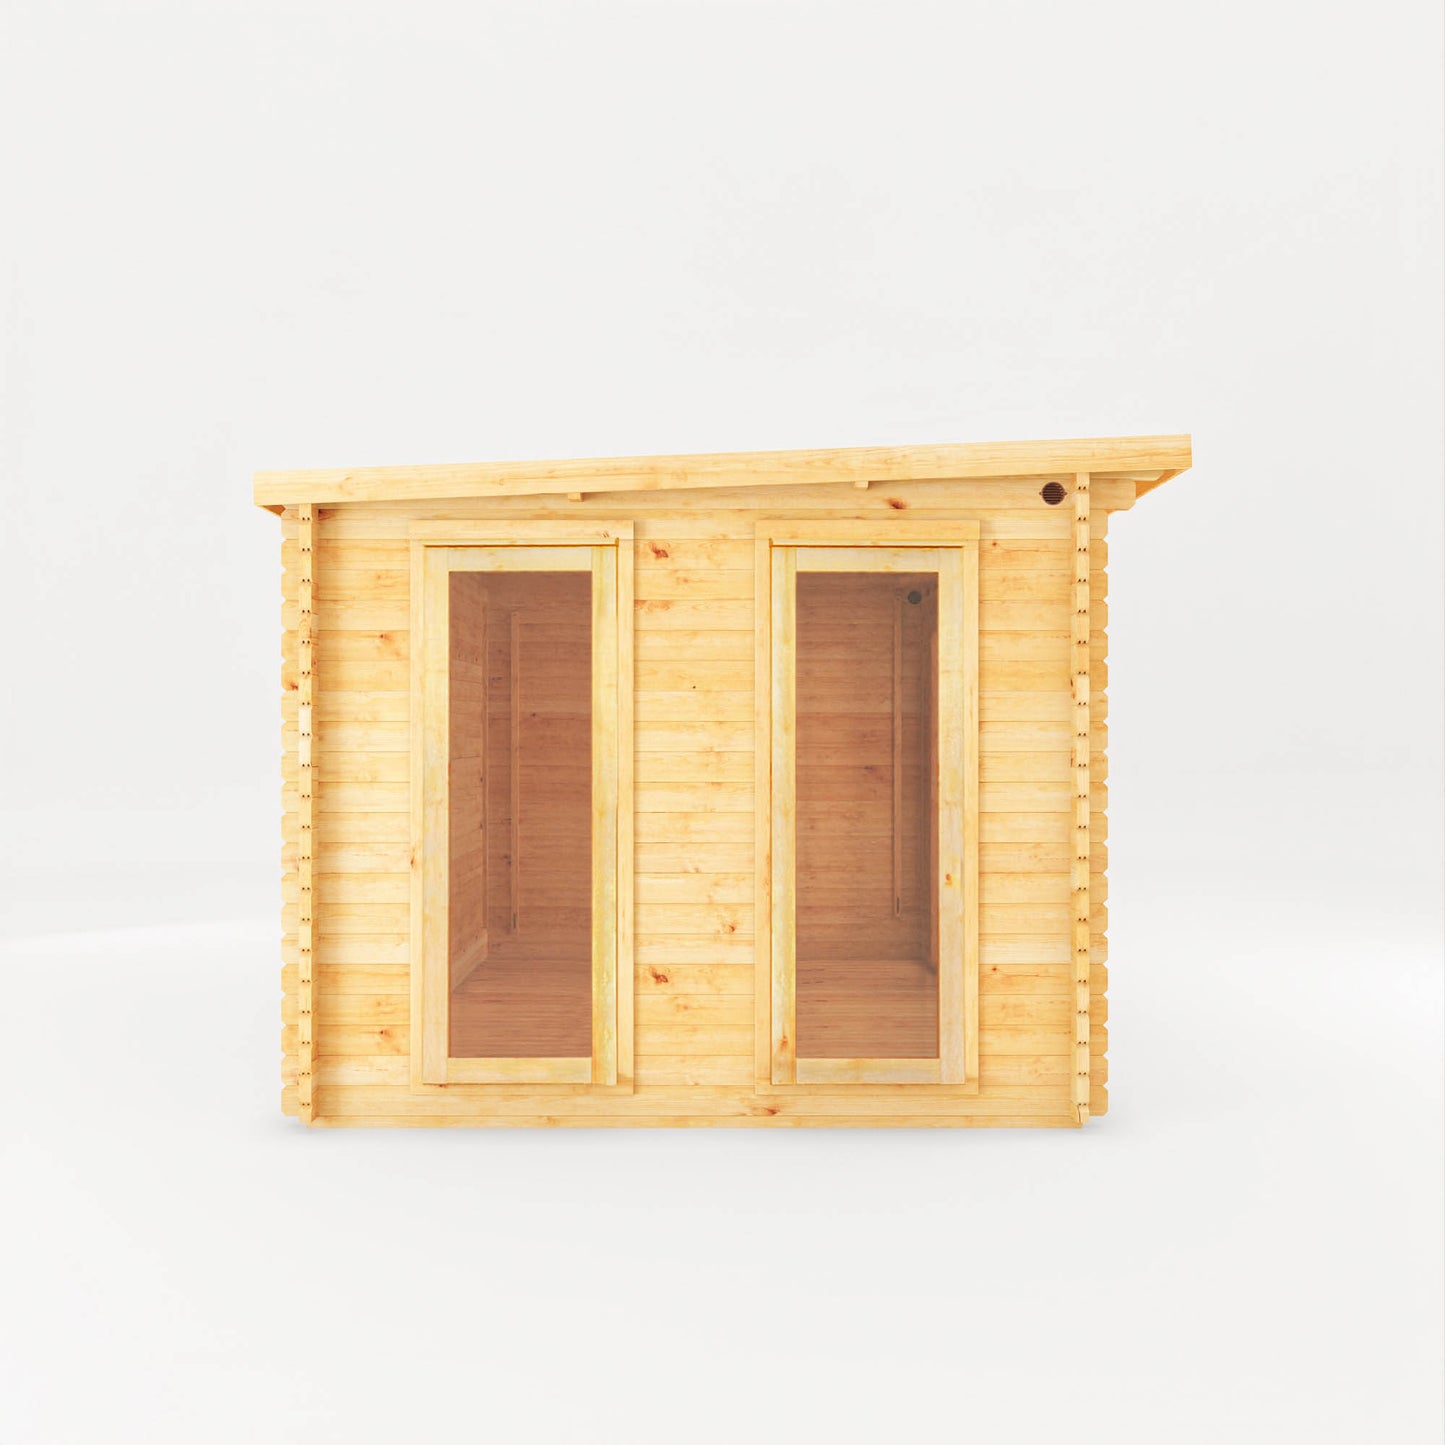 The 5.1m x 3m Wren Log Cabin with Side Shed